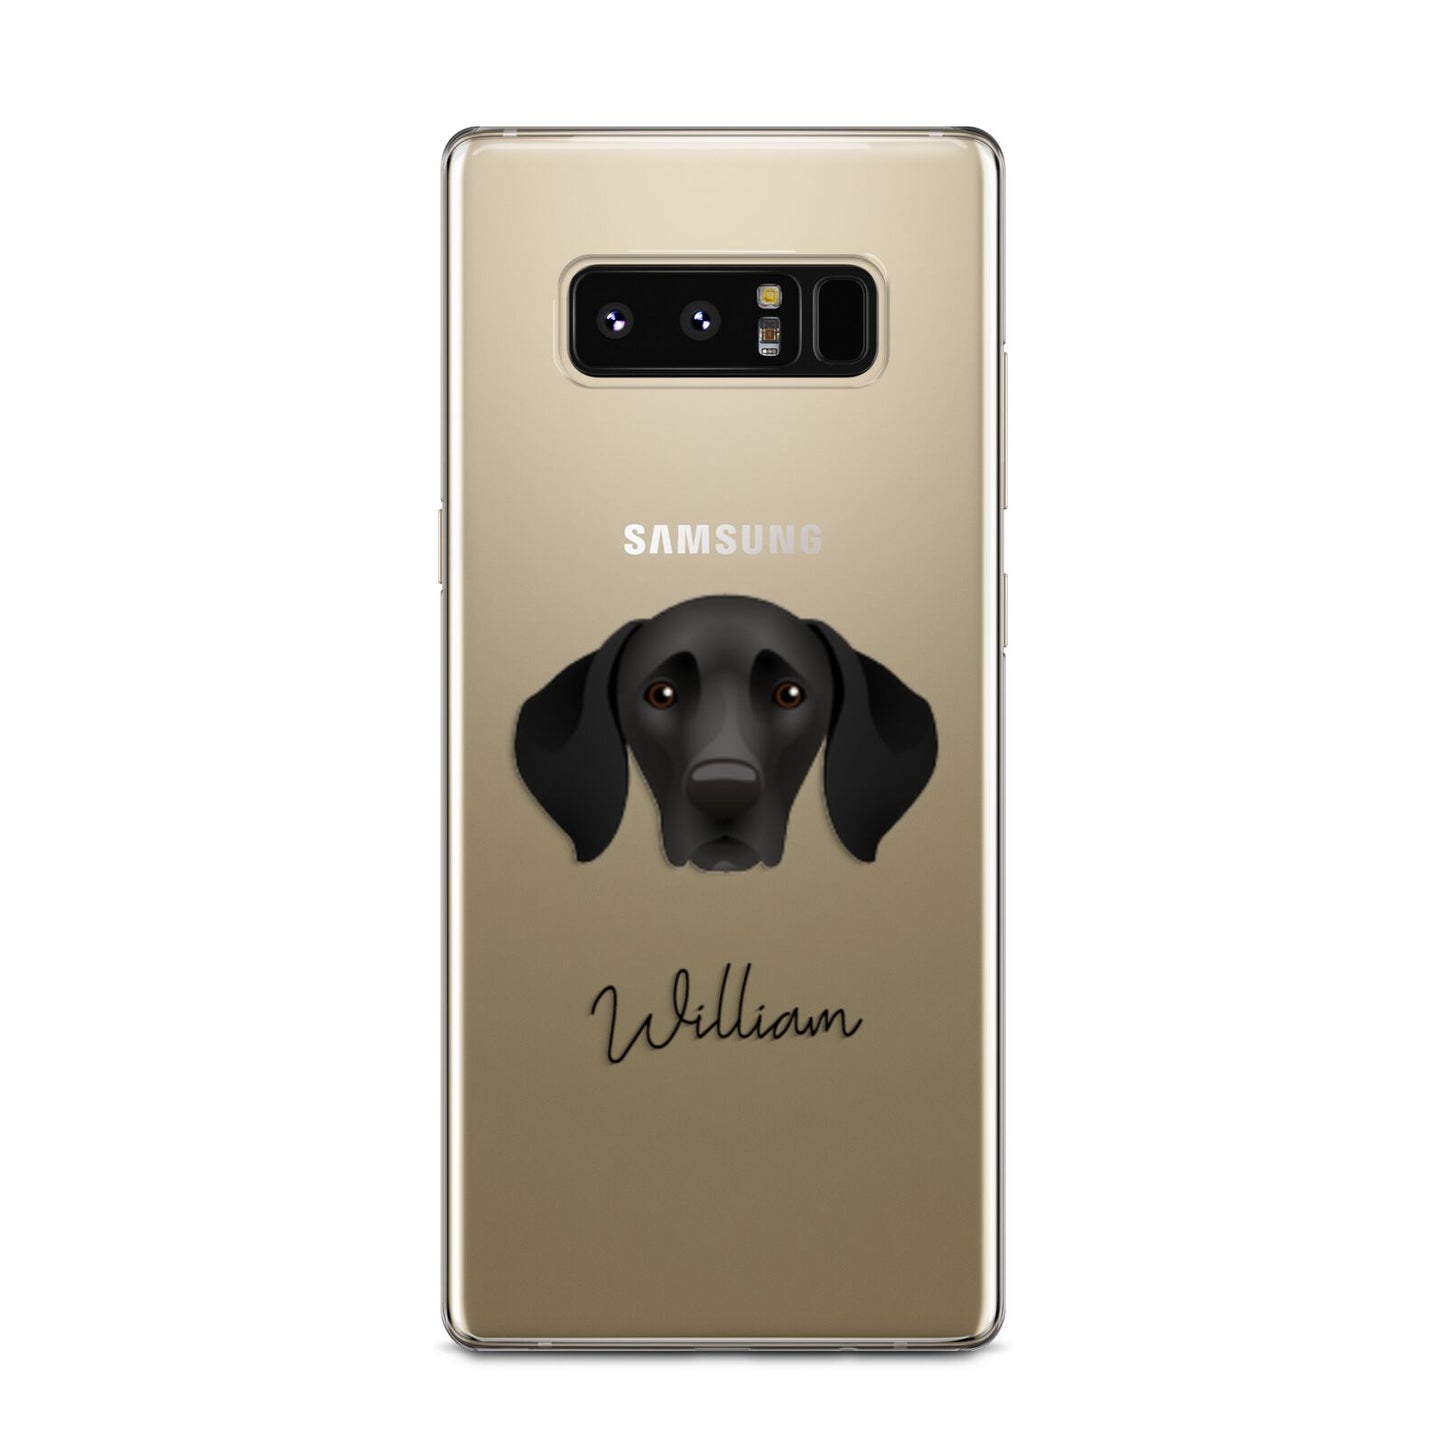 German Shorthaired Pointer Personalised Samsung Galaxy Note 8 Case